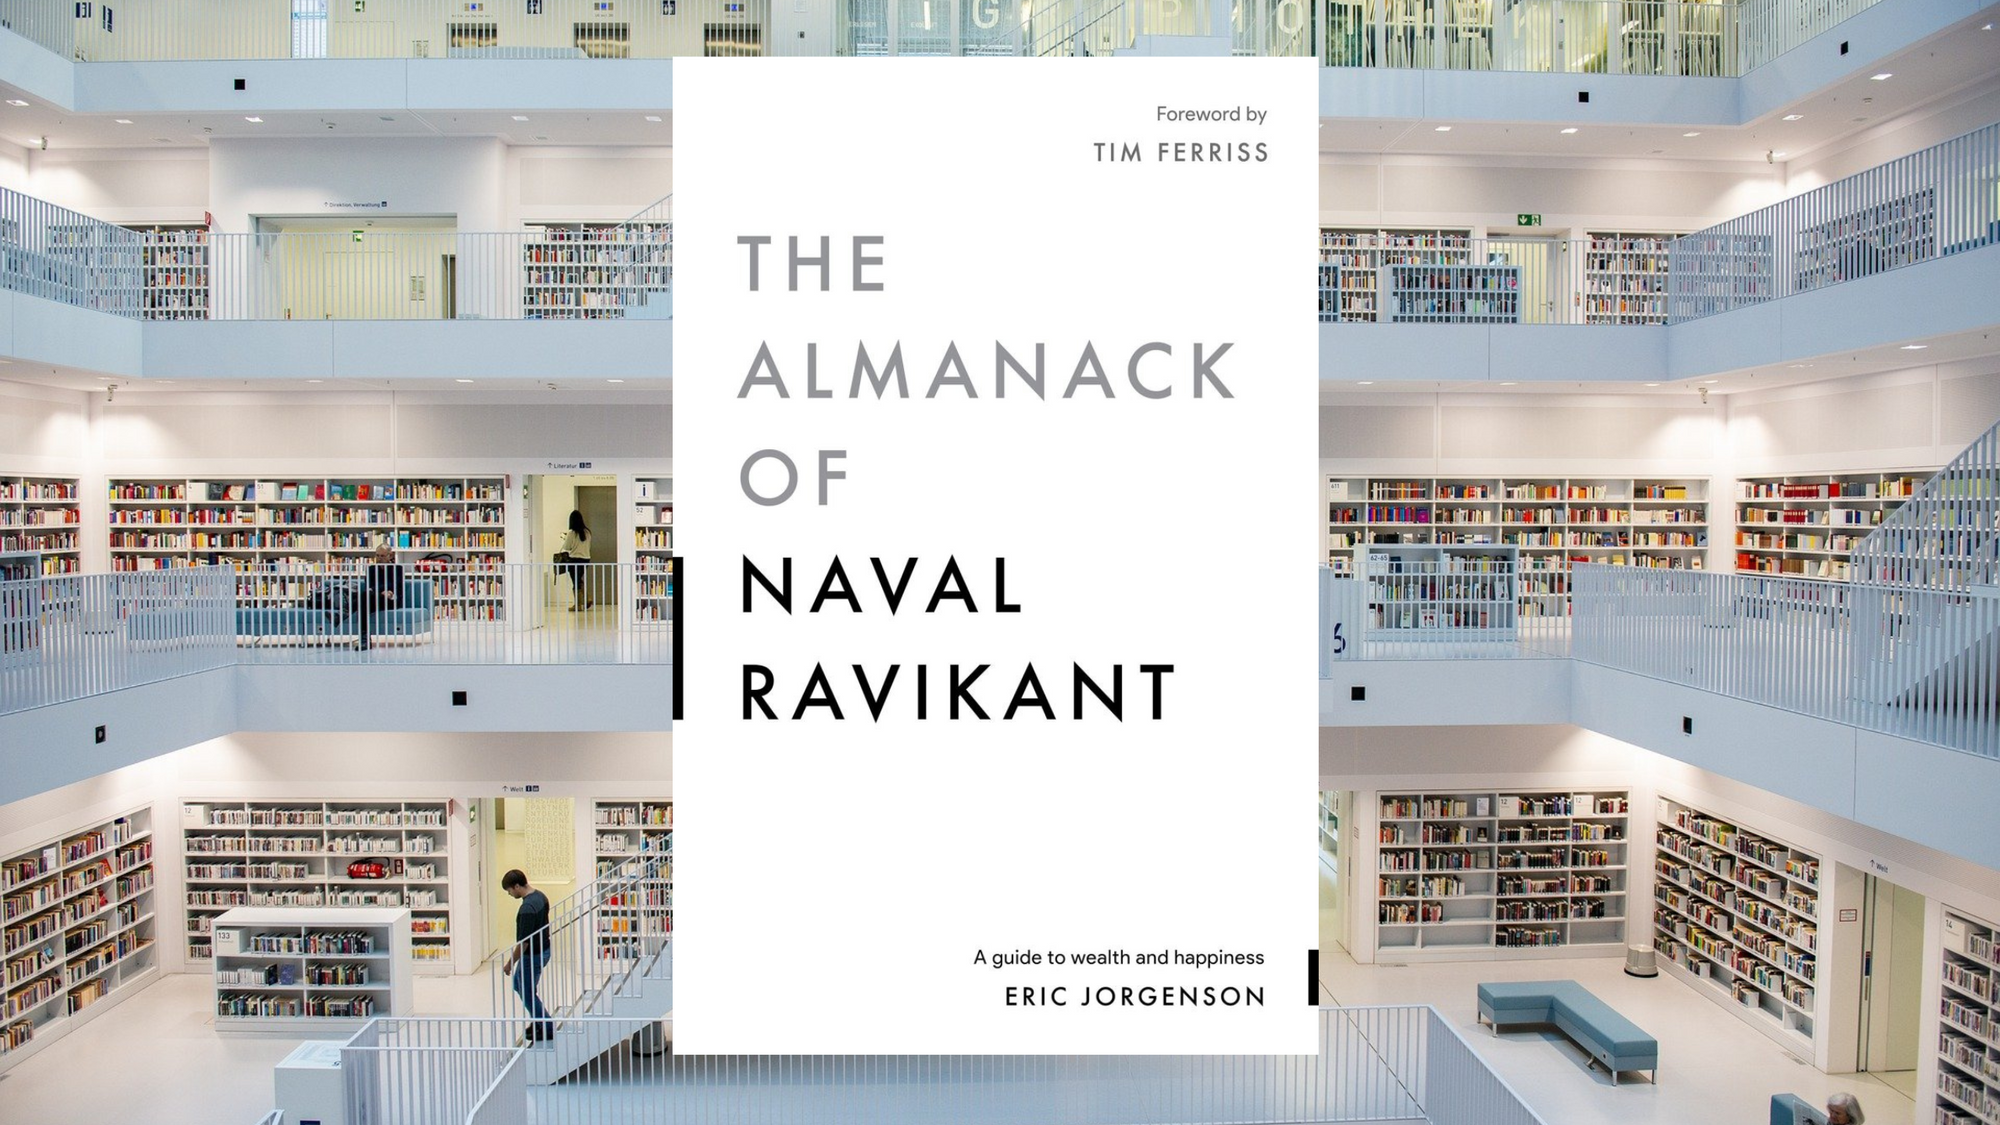 The Almanack of Naval Ravikant: A Guide book by Eric Jorgenson